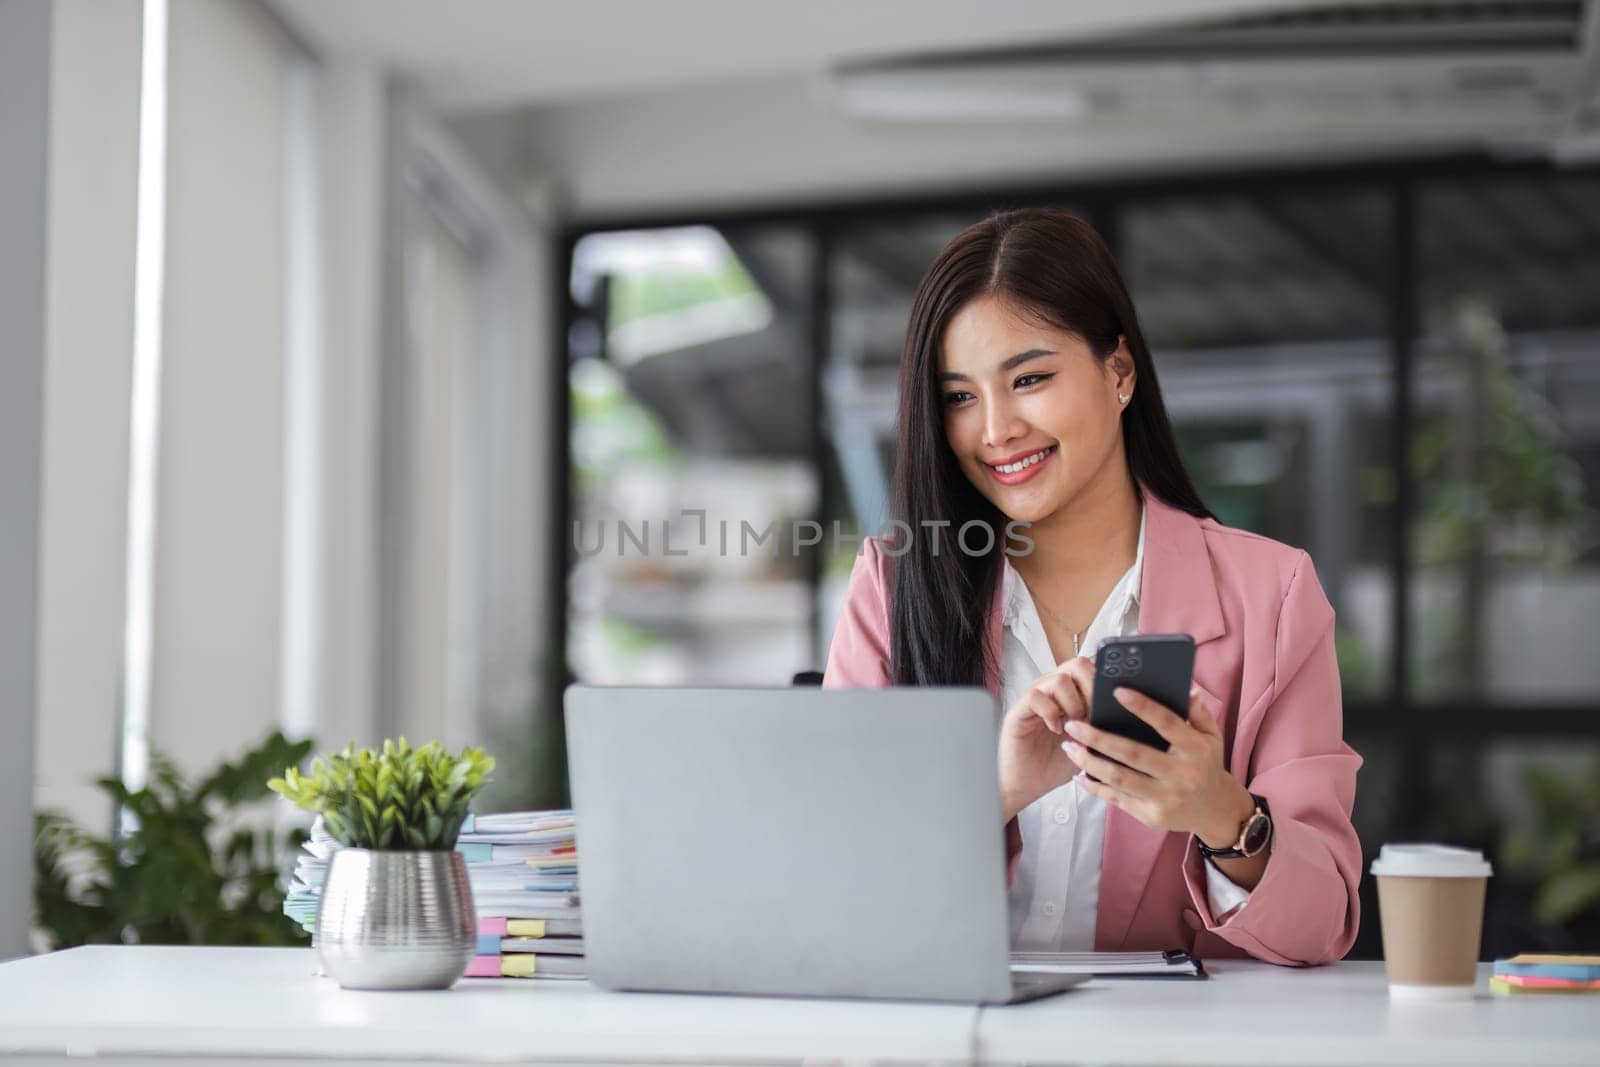 Young businesswoman using phone while sipping coffee in office..